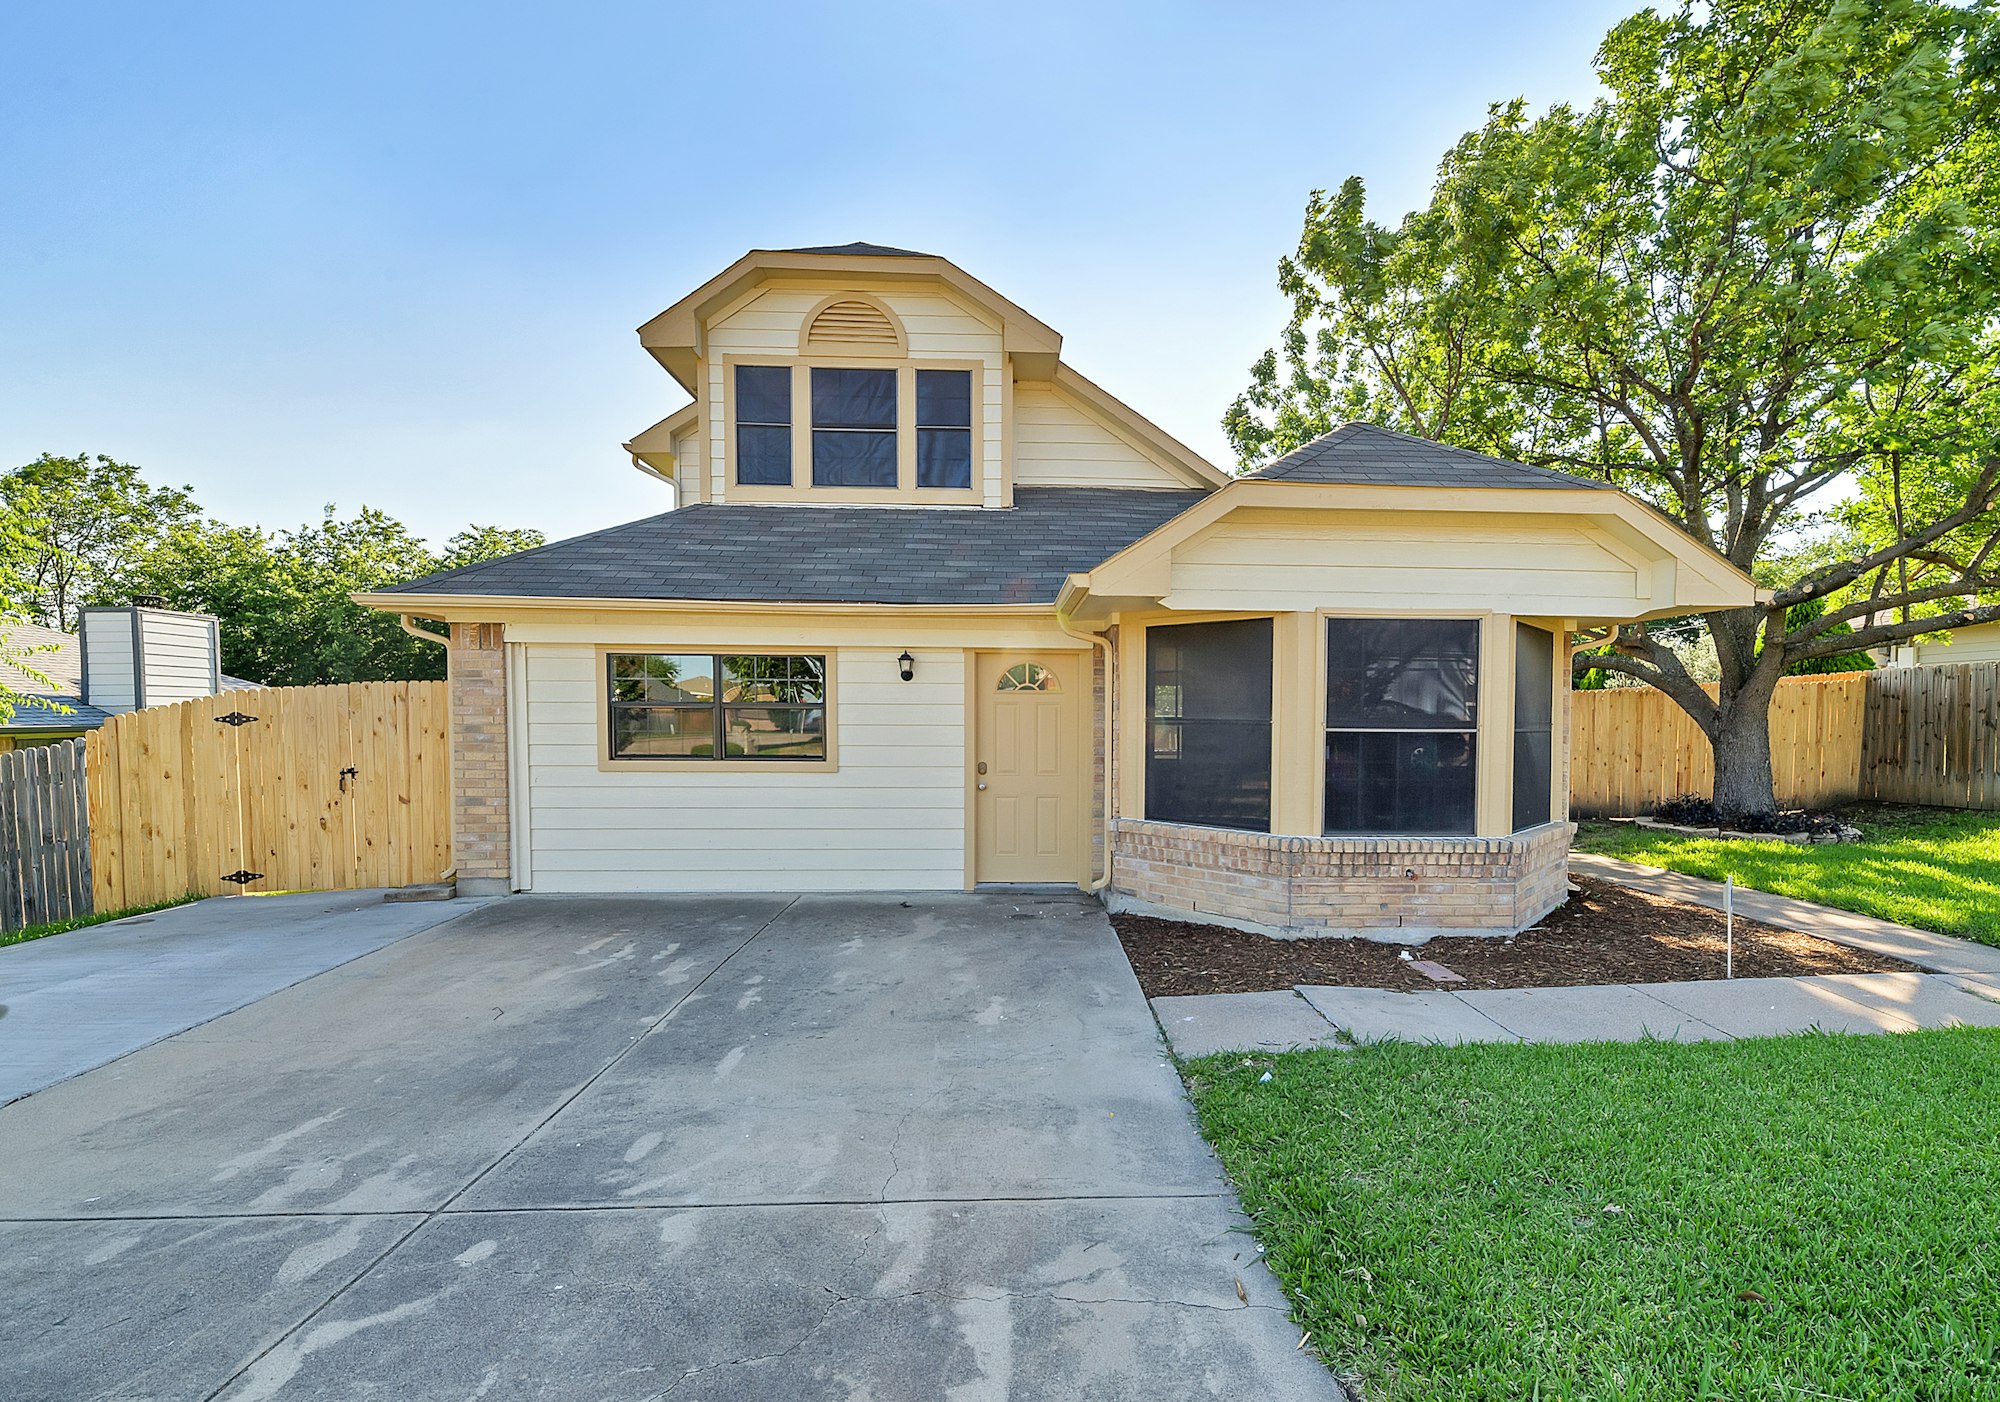 Photo 1 of 27 - 301 N Long Rifle Dr, Fort Worth, TX 76108